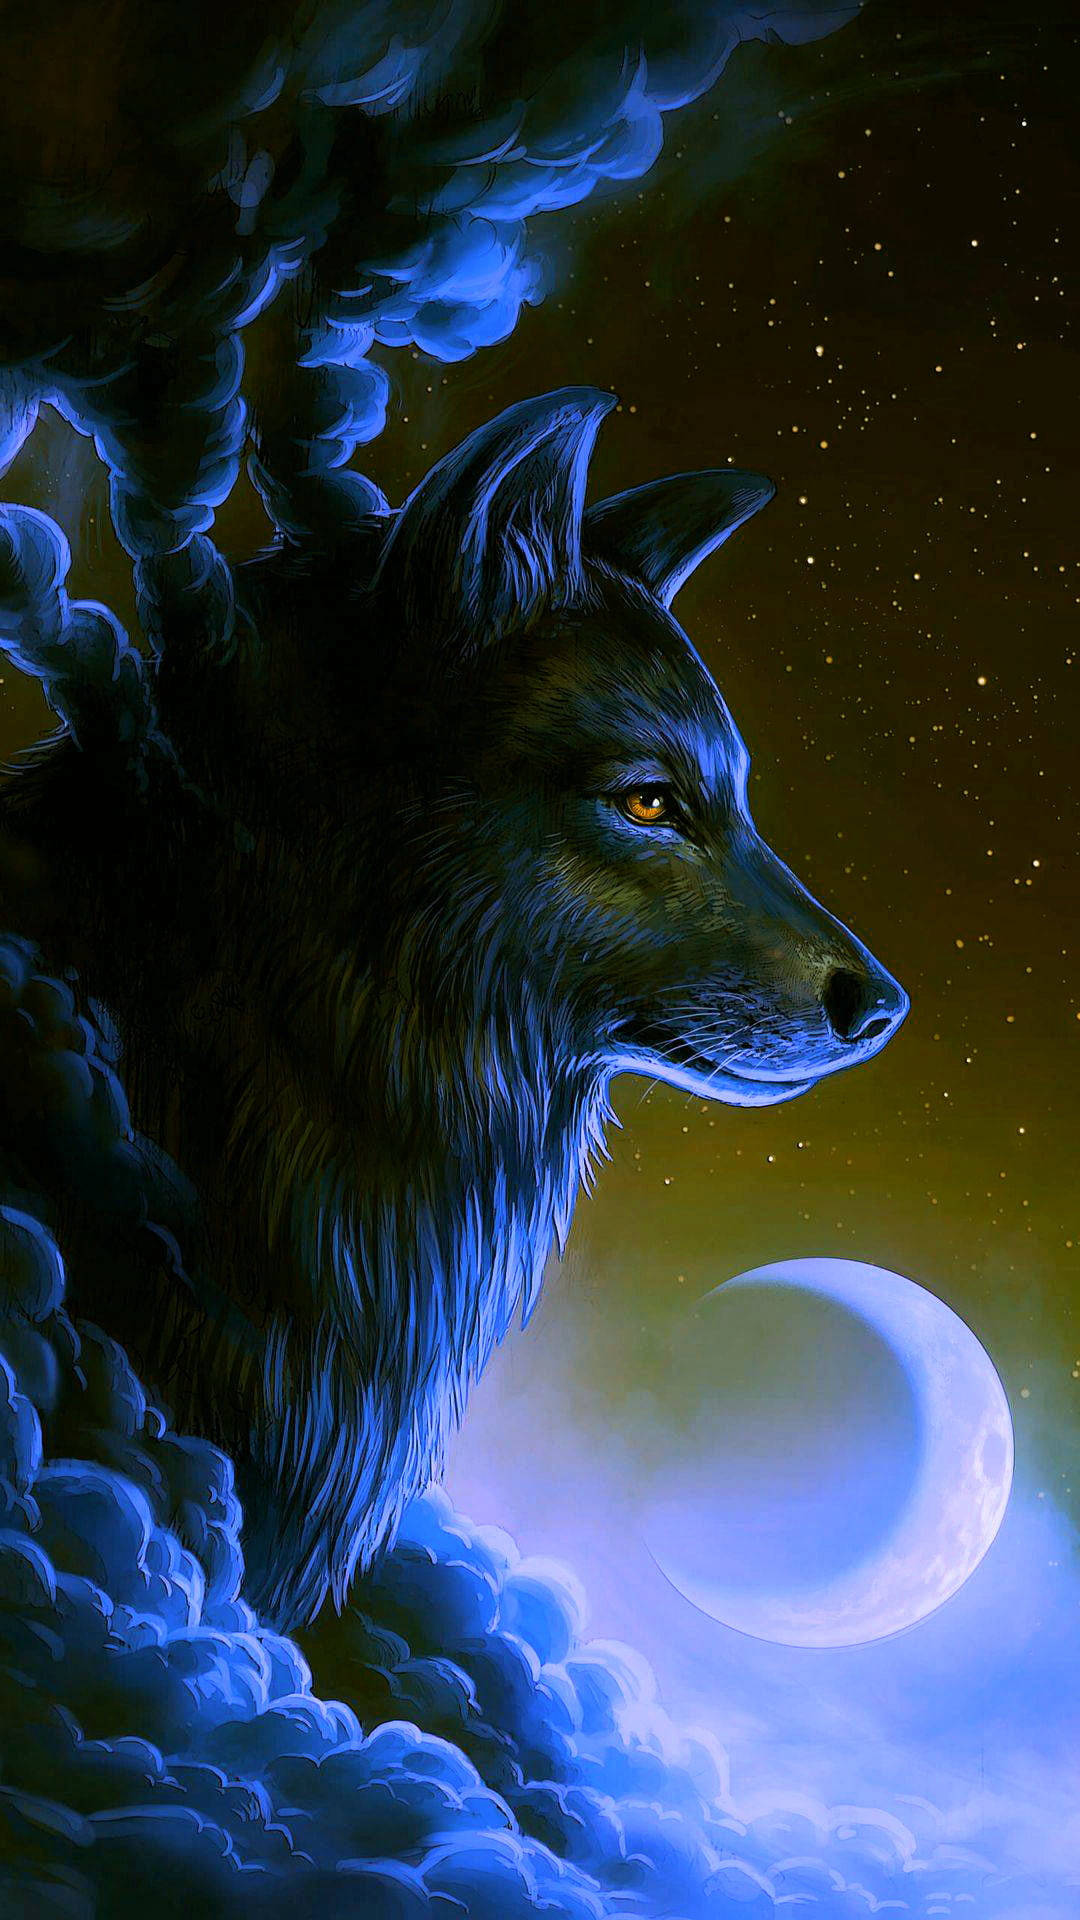 Anime Wolf In The Clouds With The Moon Wallpaper